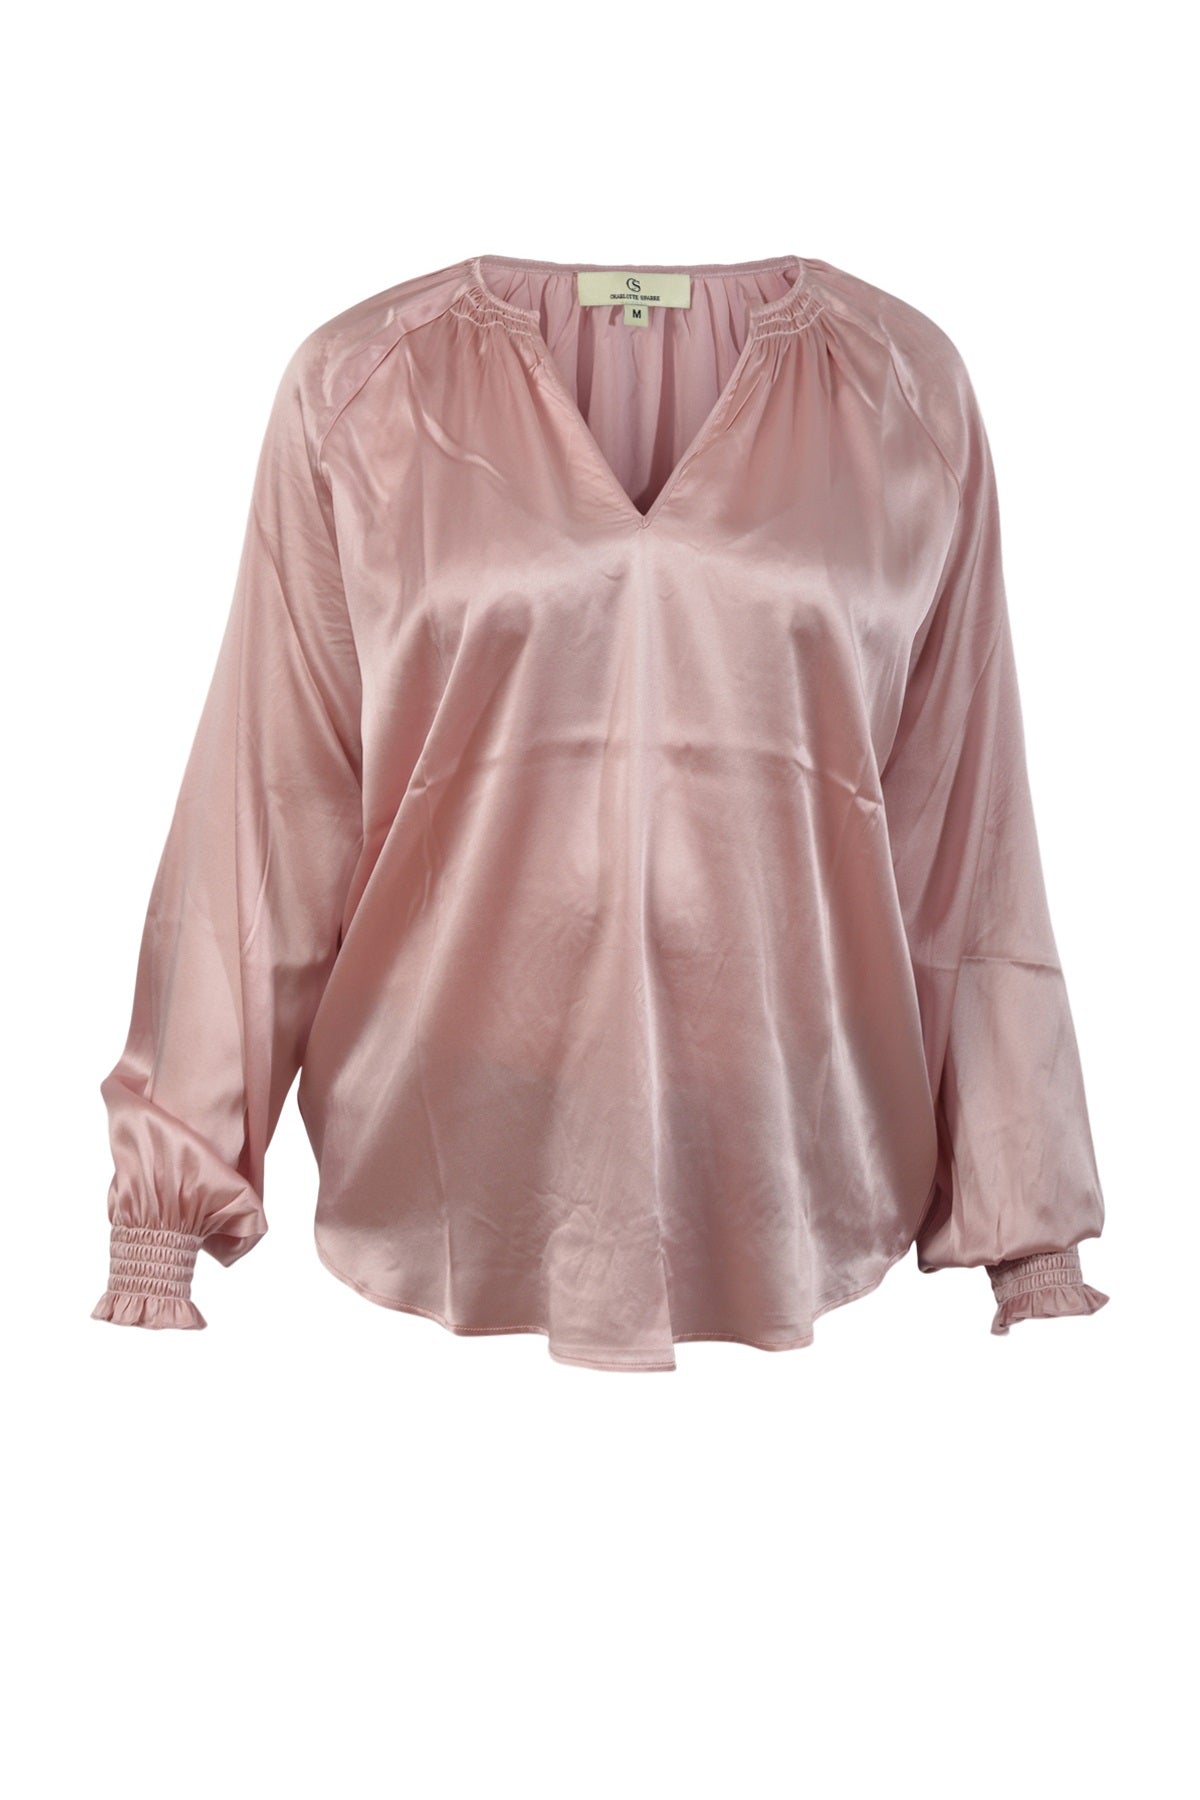 Charlotte Sparre Want me blouse 2801, Solid Rose